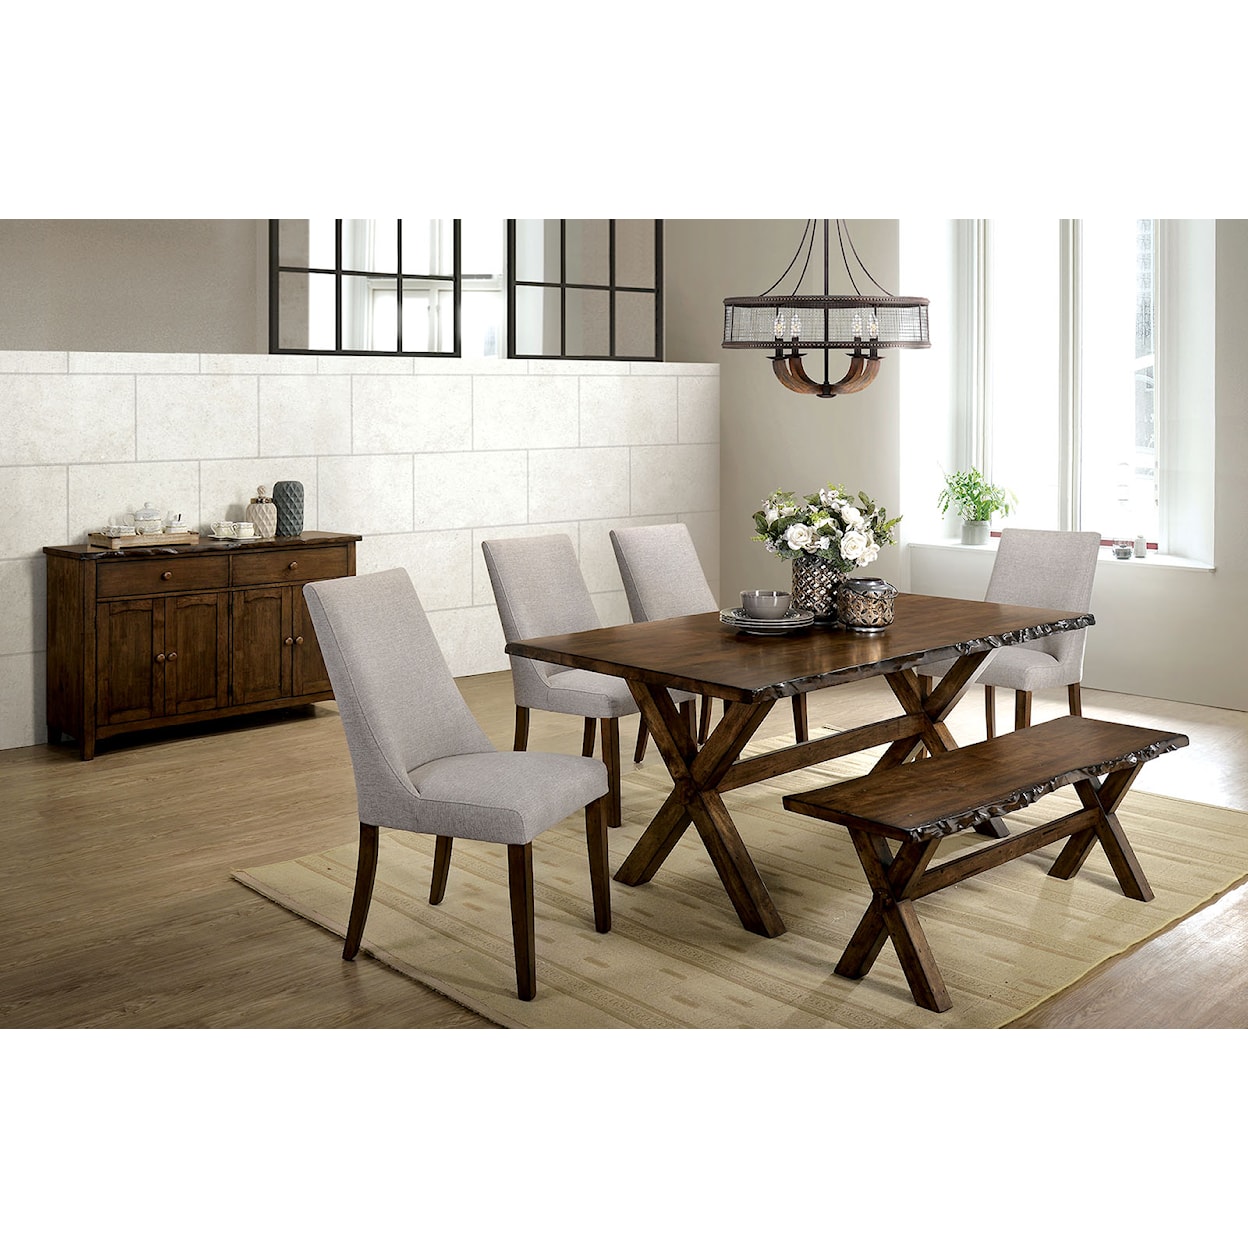 Furniture of America Woodworth 6-Piece Dining Set